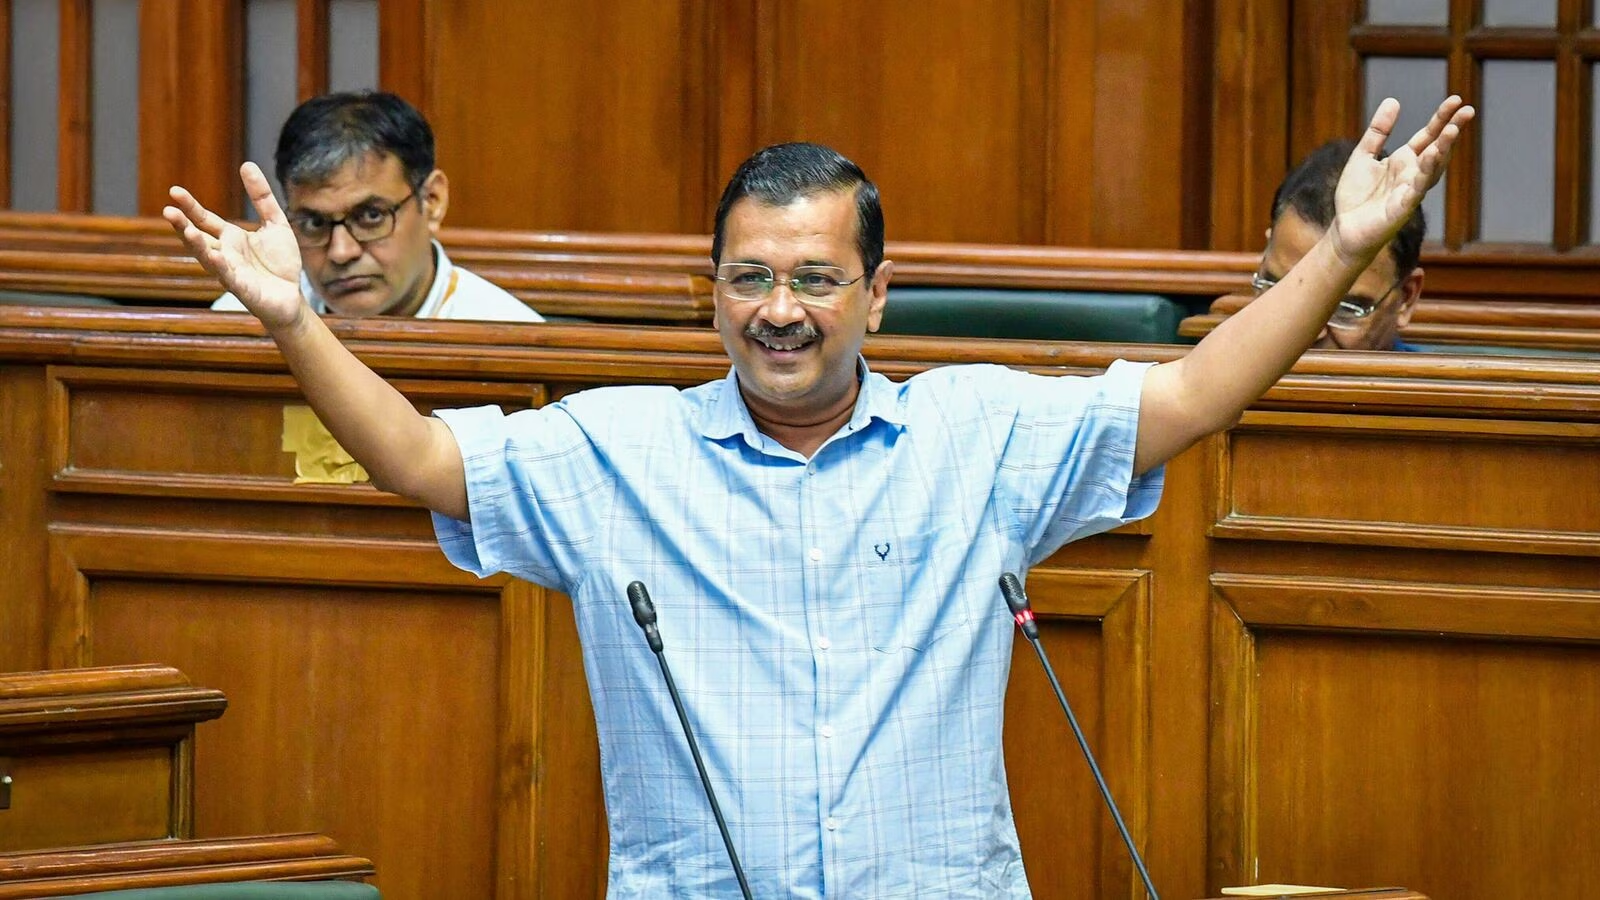 Arvind Kejriwal will participate in Mumbai's INDIA bloc meeting on August 31